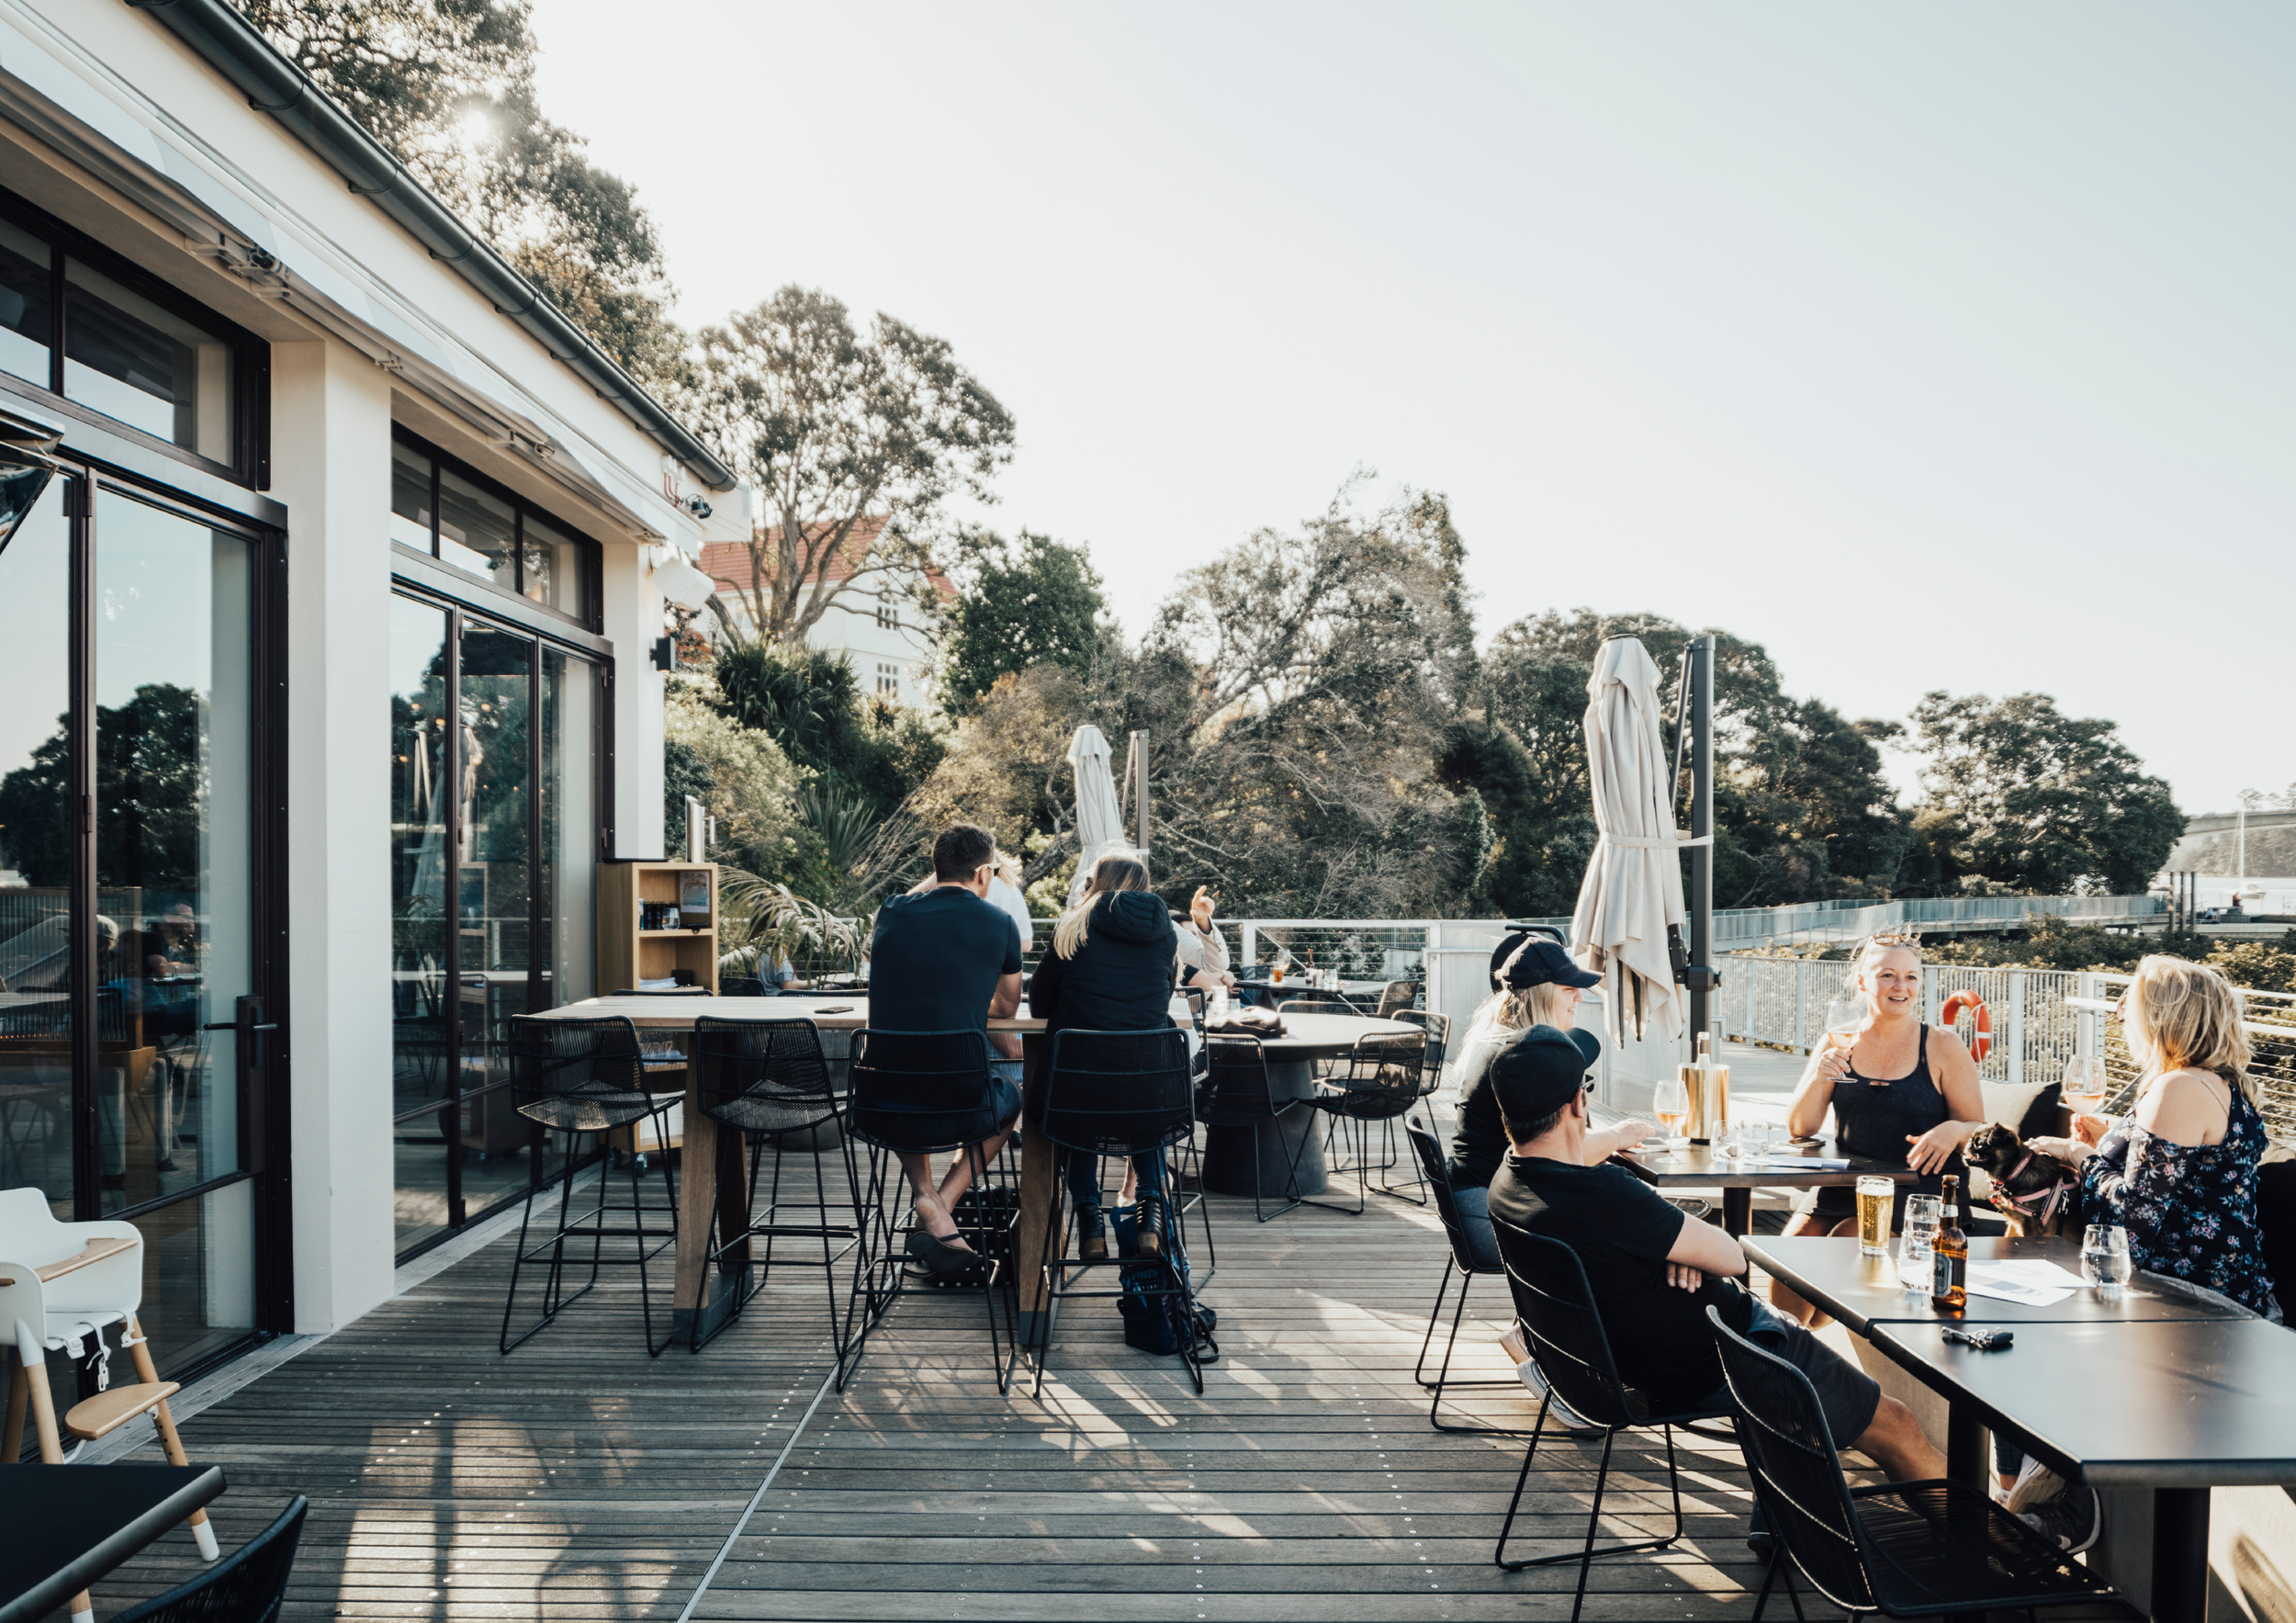 Cafe-bistro Fabric is an urbane addition to Hobsonville Point